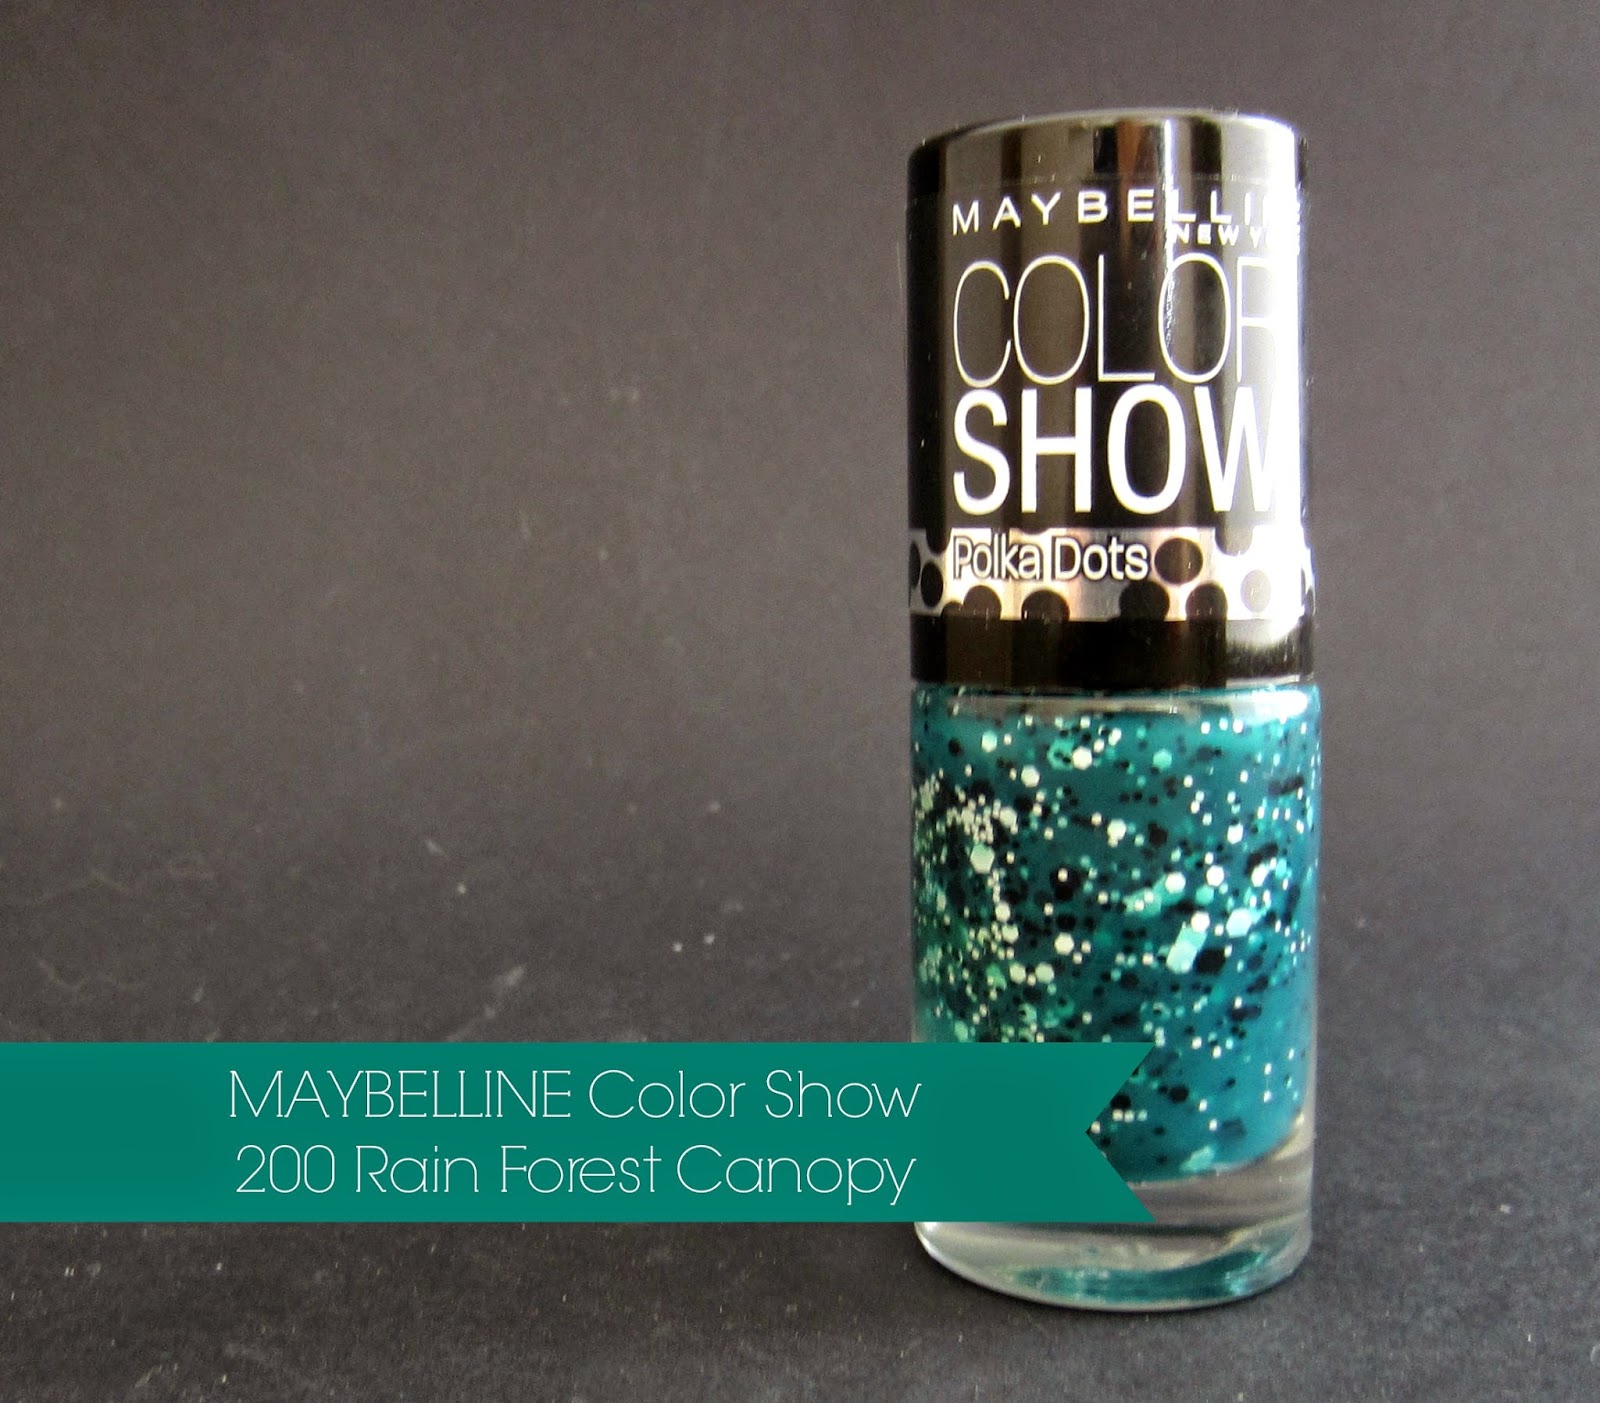 MAYBELLINE - Rain Forest Canopy